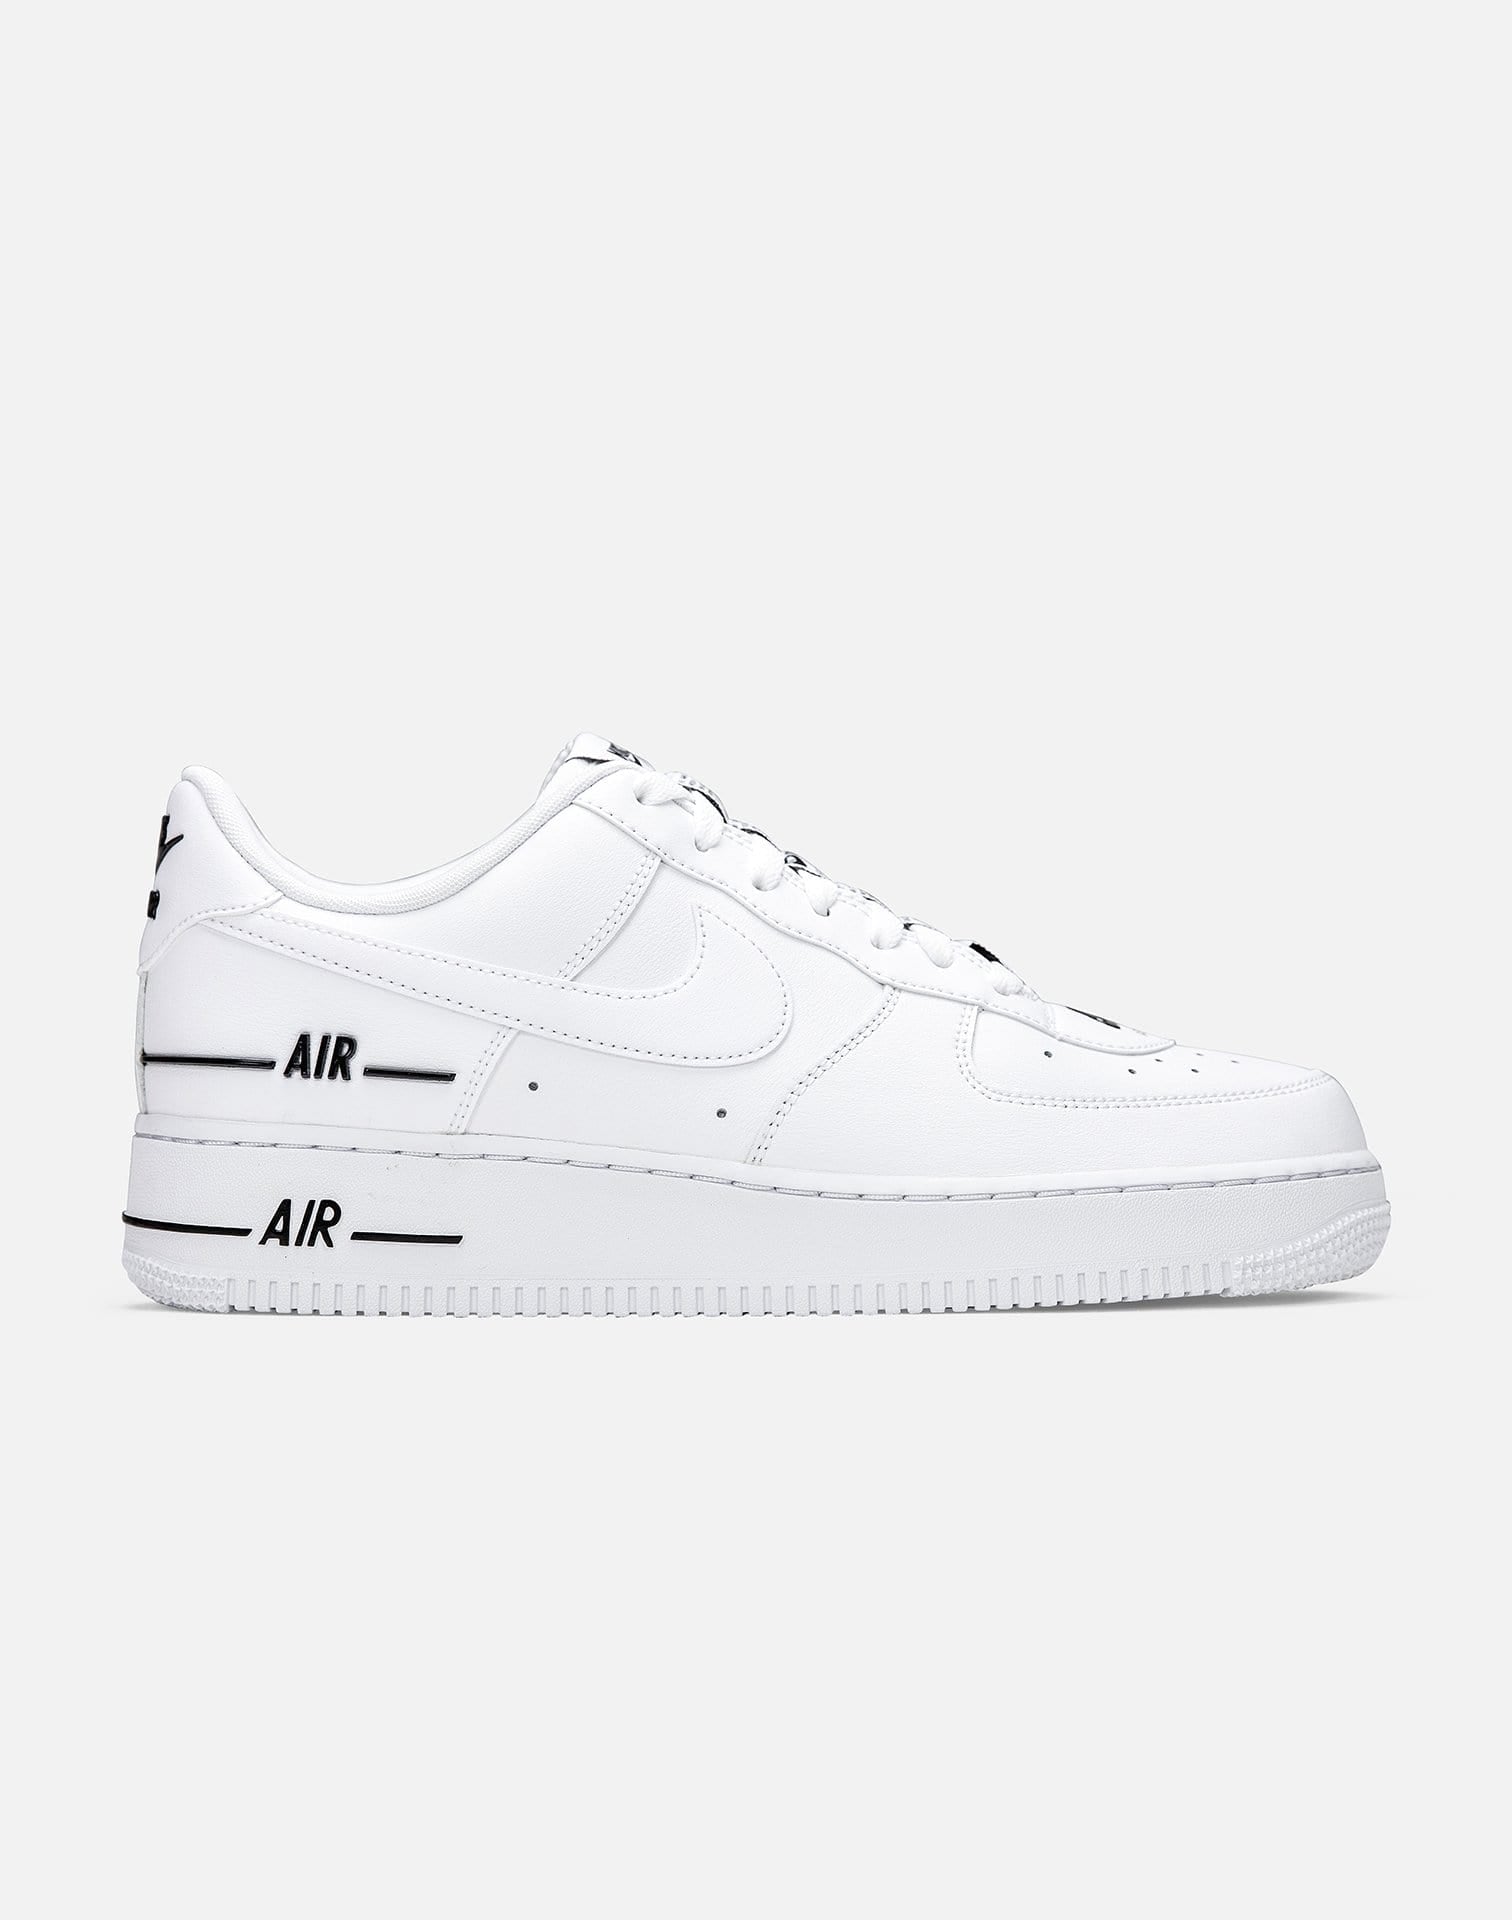 Nike Air Force 1 Mid '07 LV8 – DTLR